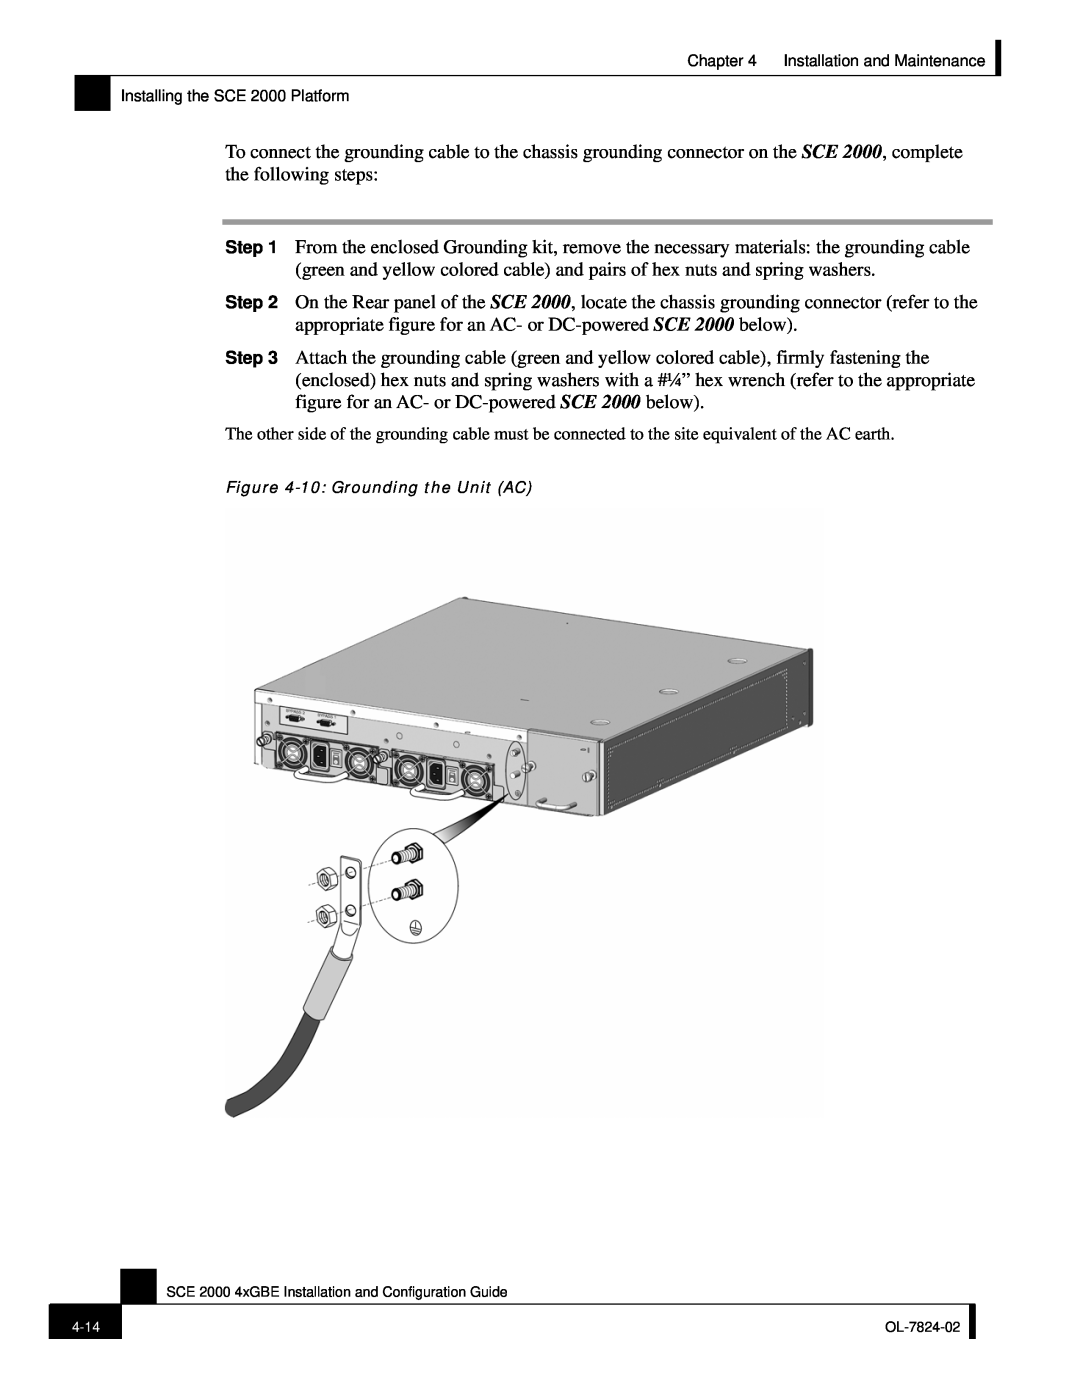 Cisco Systems SCE 2000 4xGBE manual 10 Grounding the Unit AC 